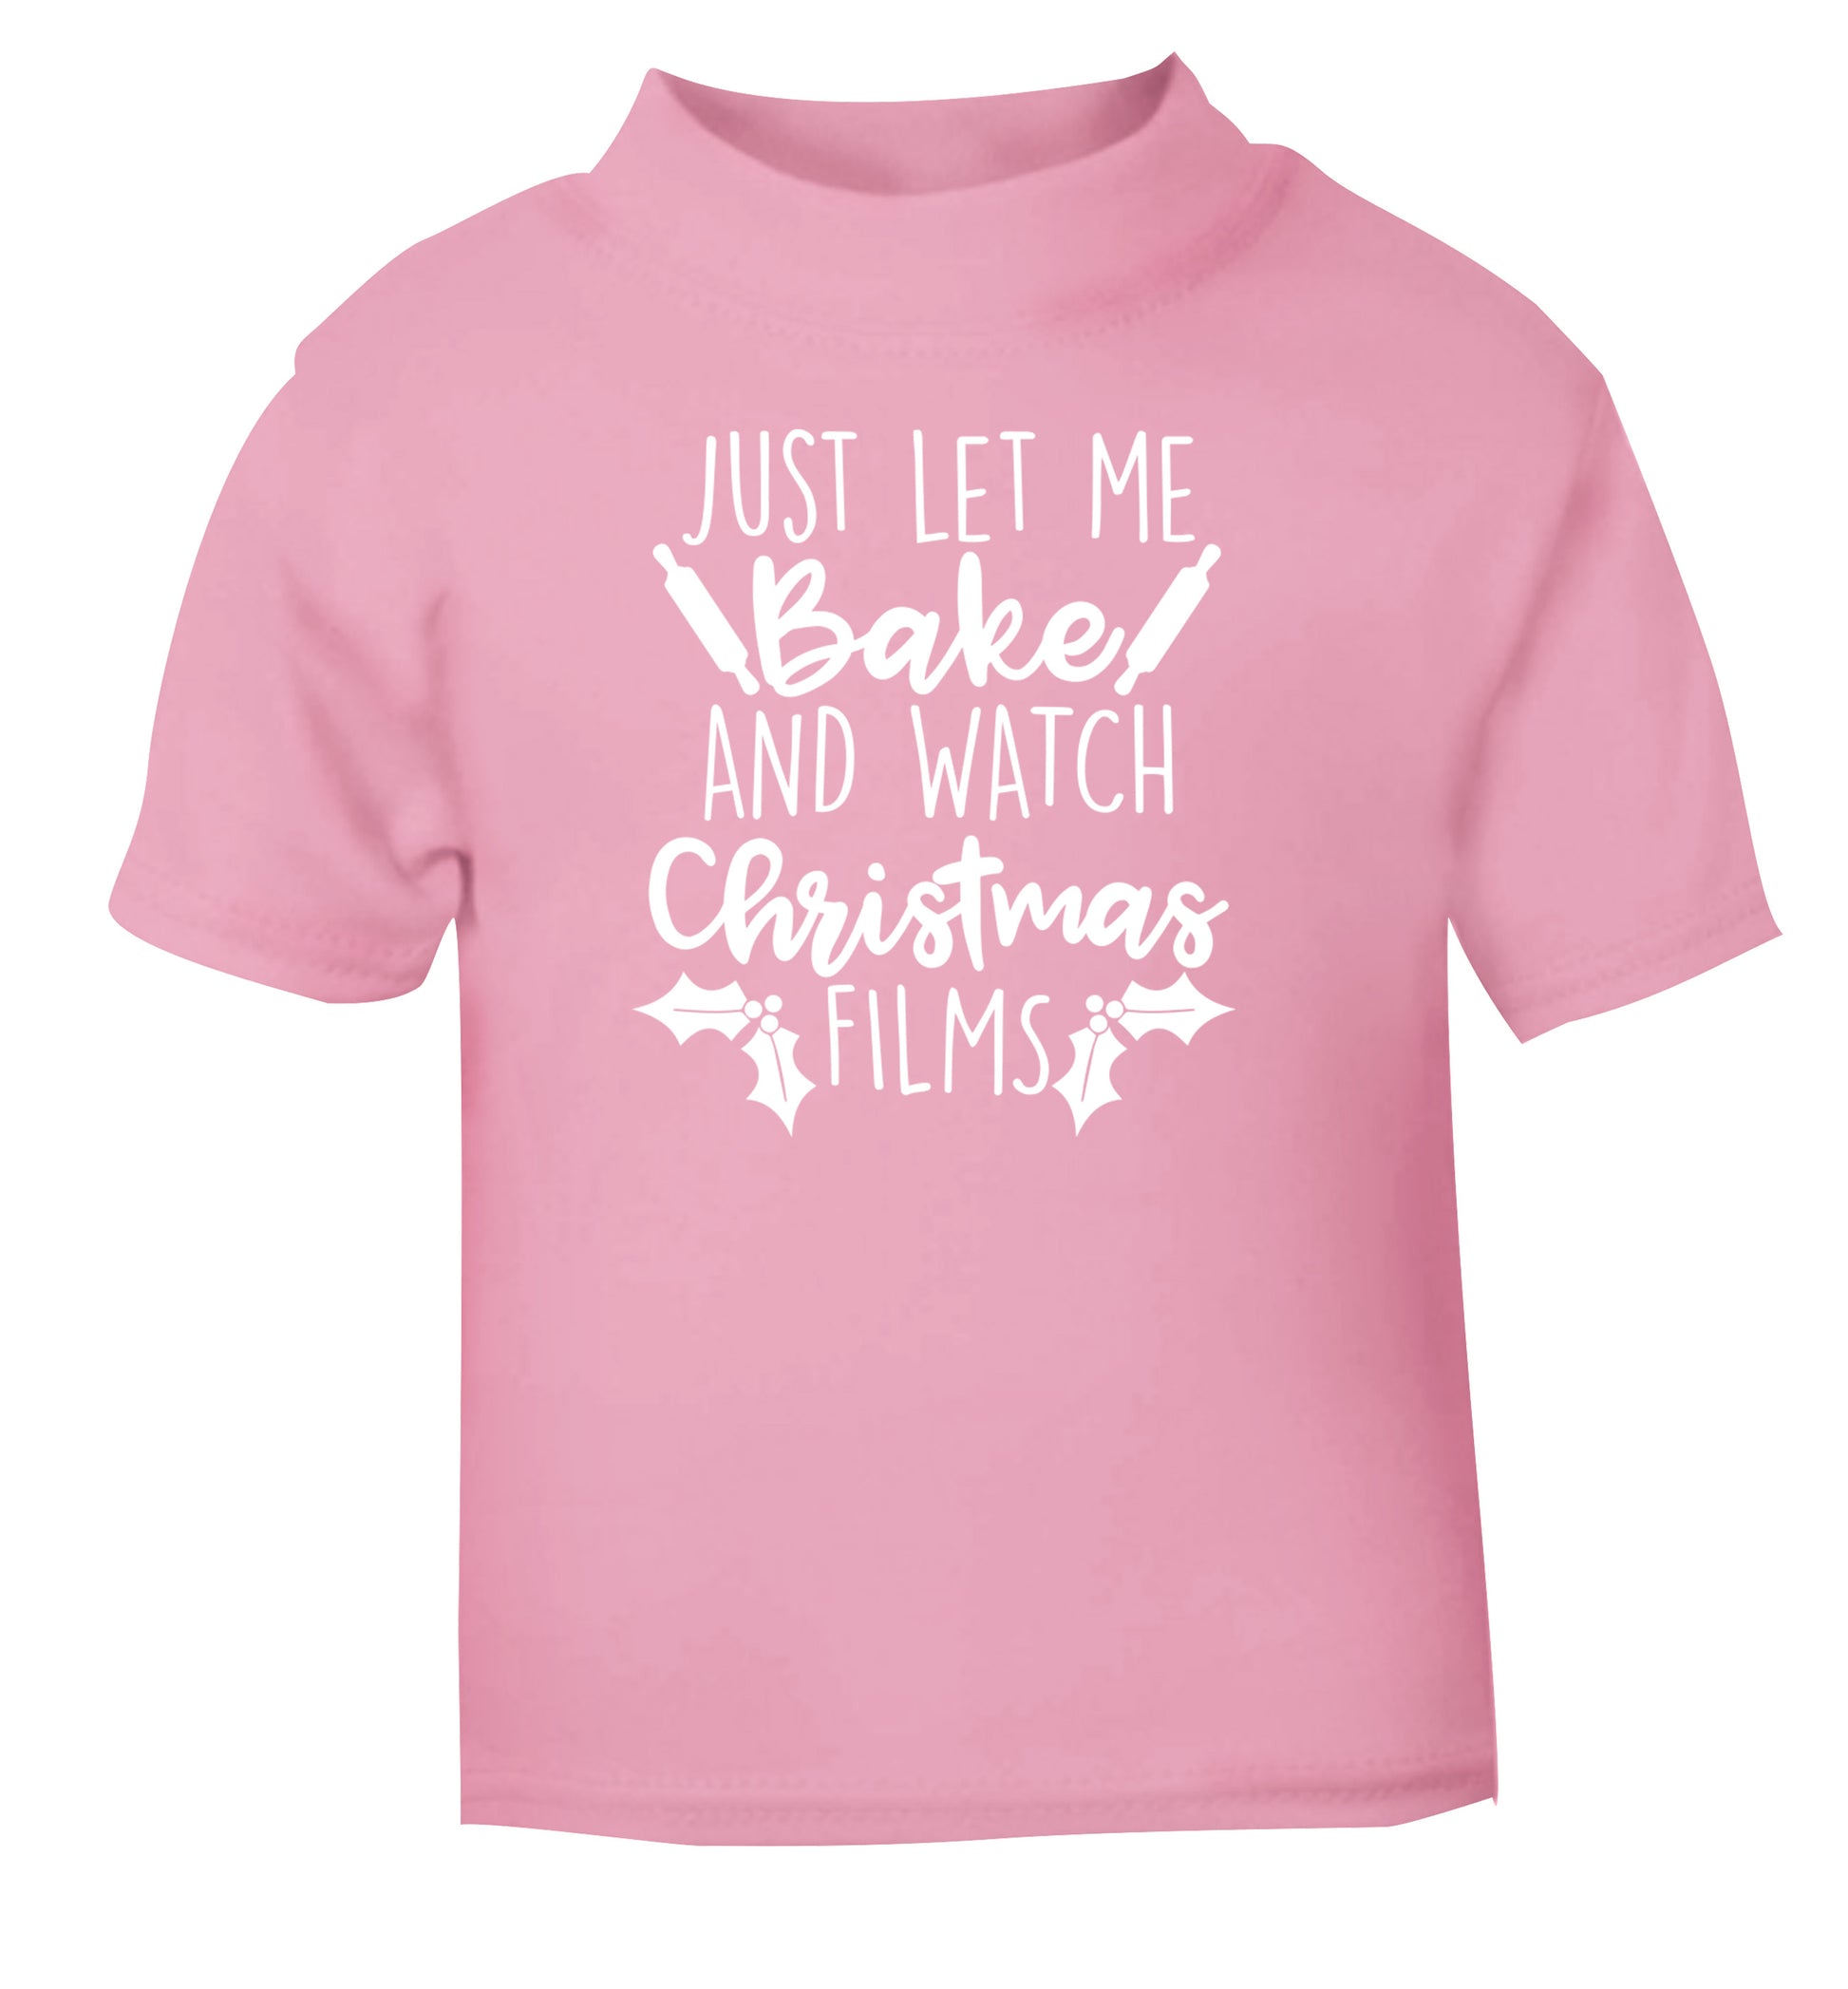 Just let me bake and watch Christmas films light pink Baby Toddler Tshirt 2 Years